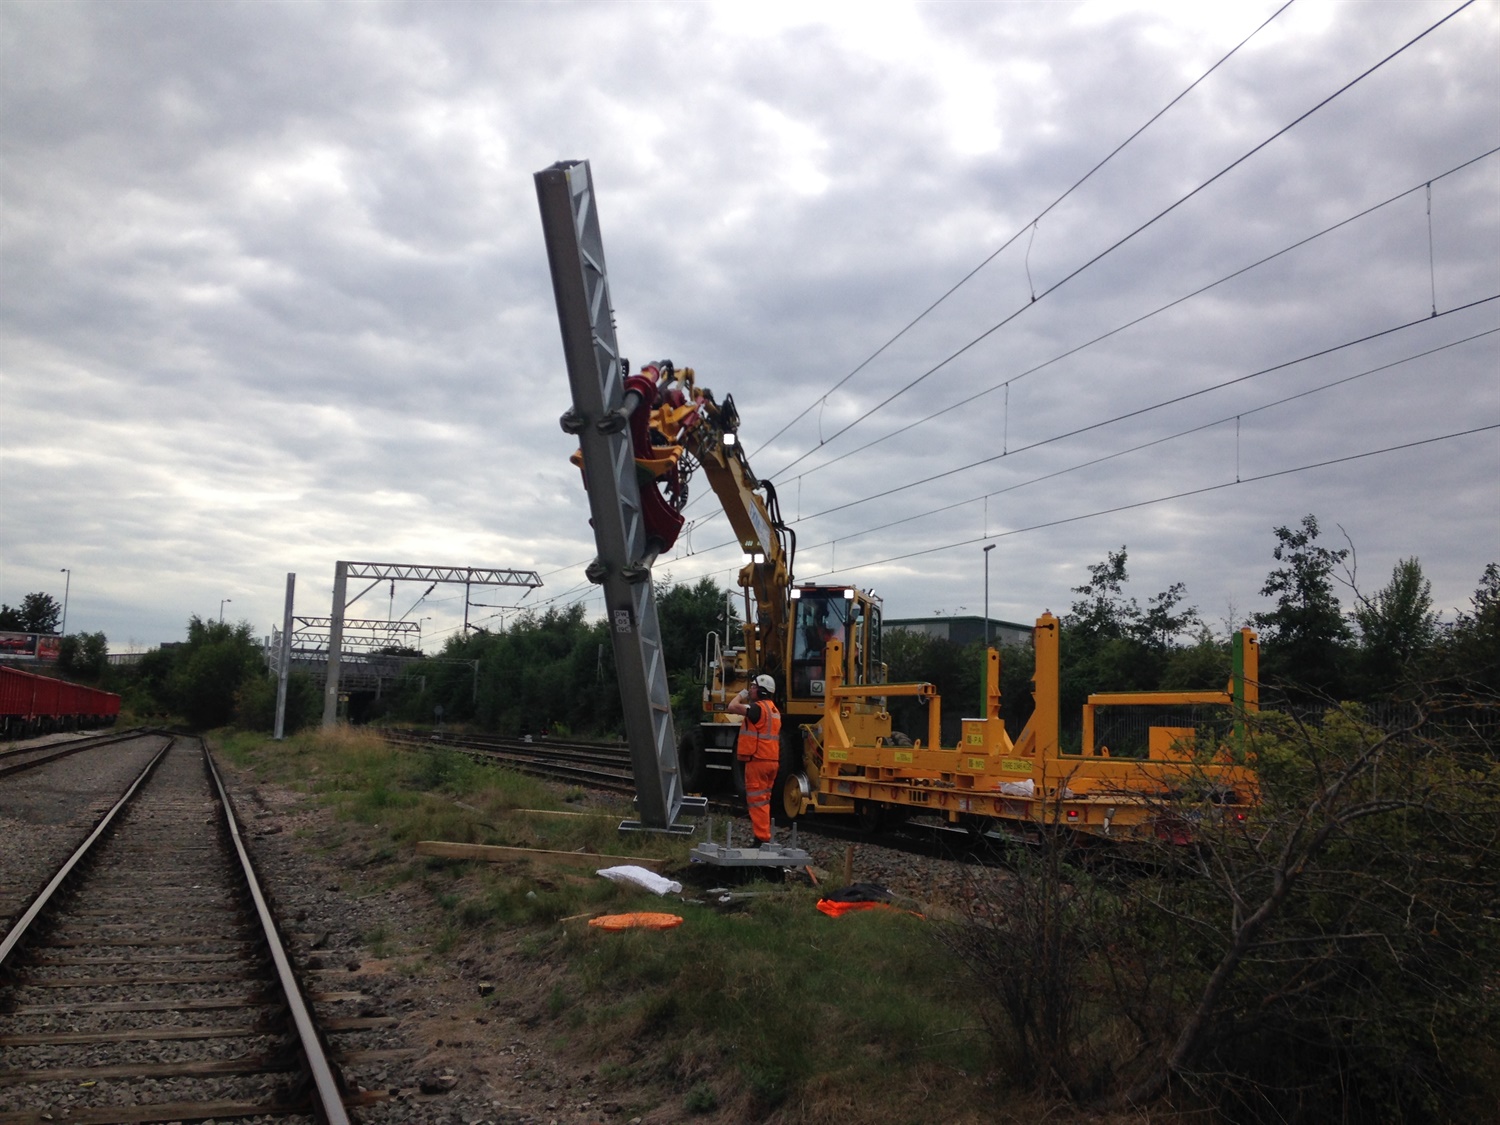 Chase Line electrification moves forward with steel structure installation